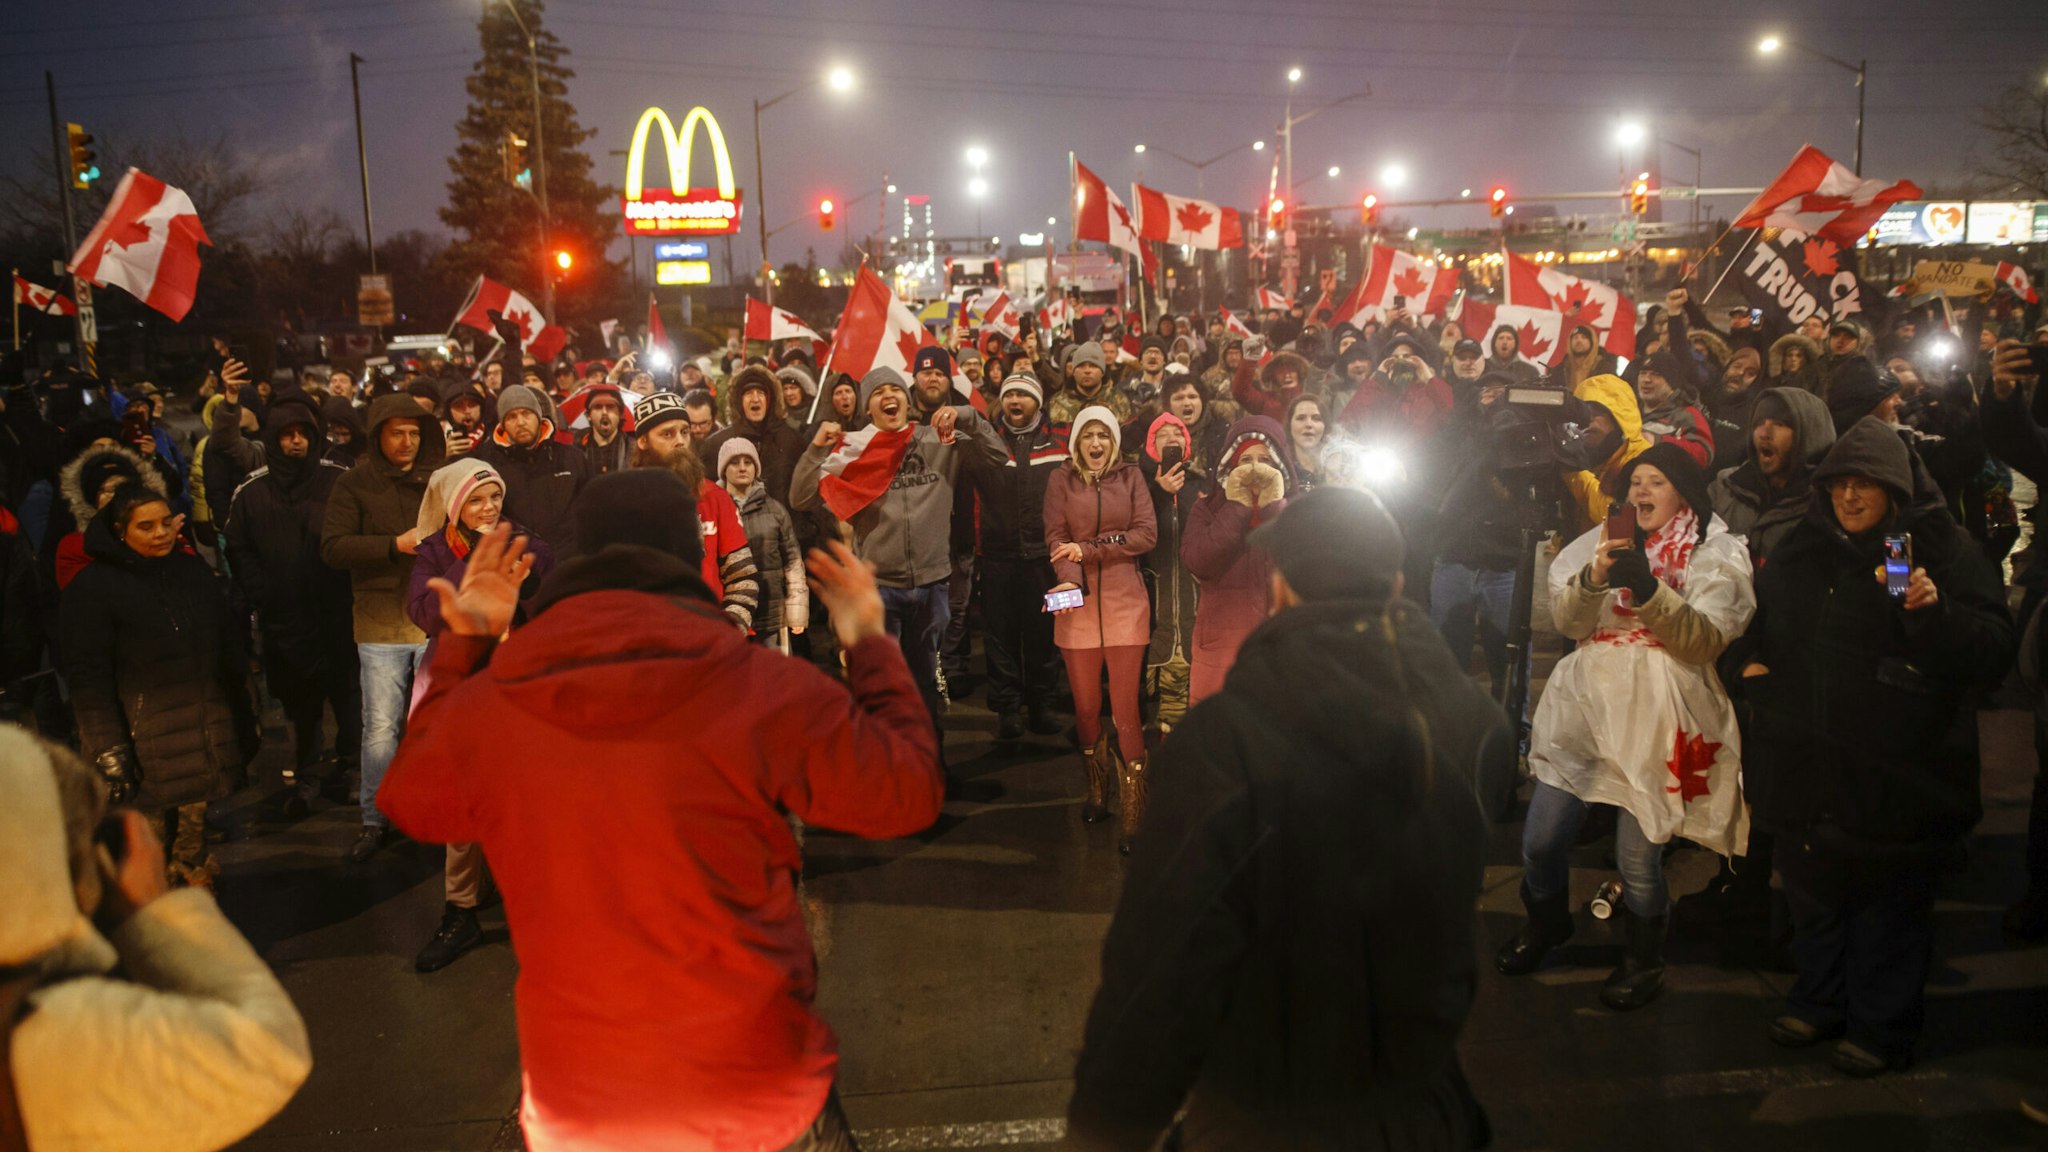 Protestors and supporters take a vote on whether to stay or leave ahead of an impending 7PM injunction deadline at the foot of the Ambassador Bridge, sealing off the flow of commercial traffic over the bridge into Canada from Detroit, on February 11, 2022 in Windsor, Canada.